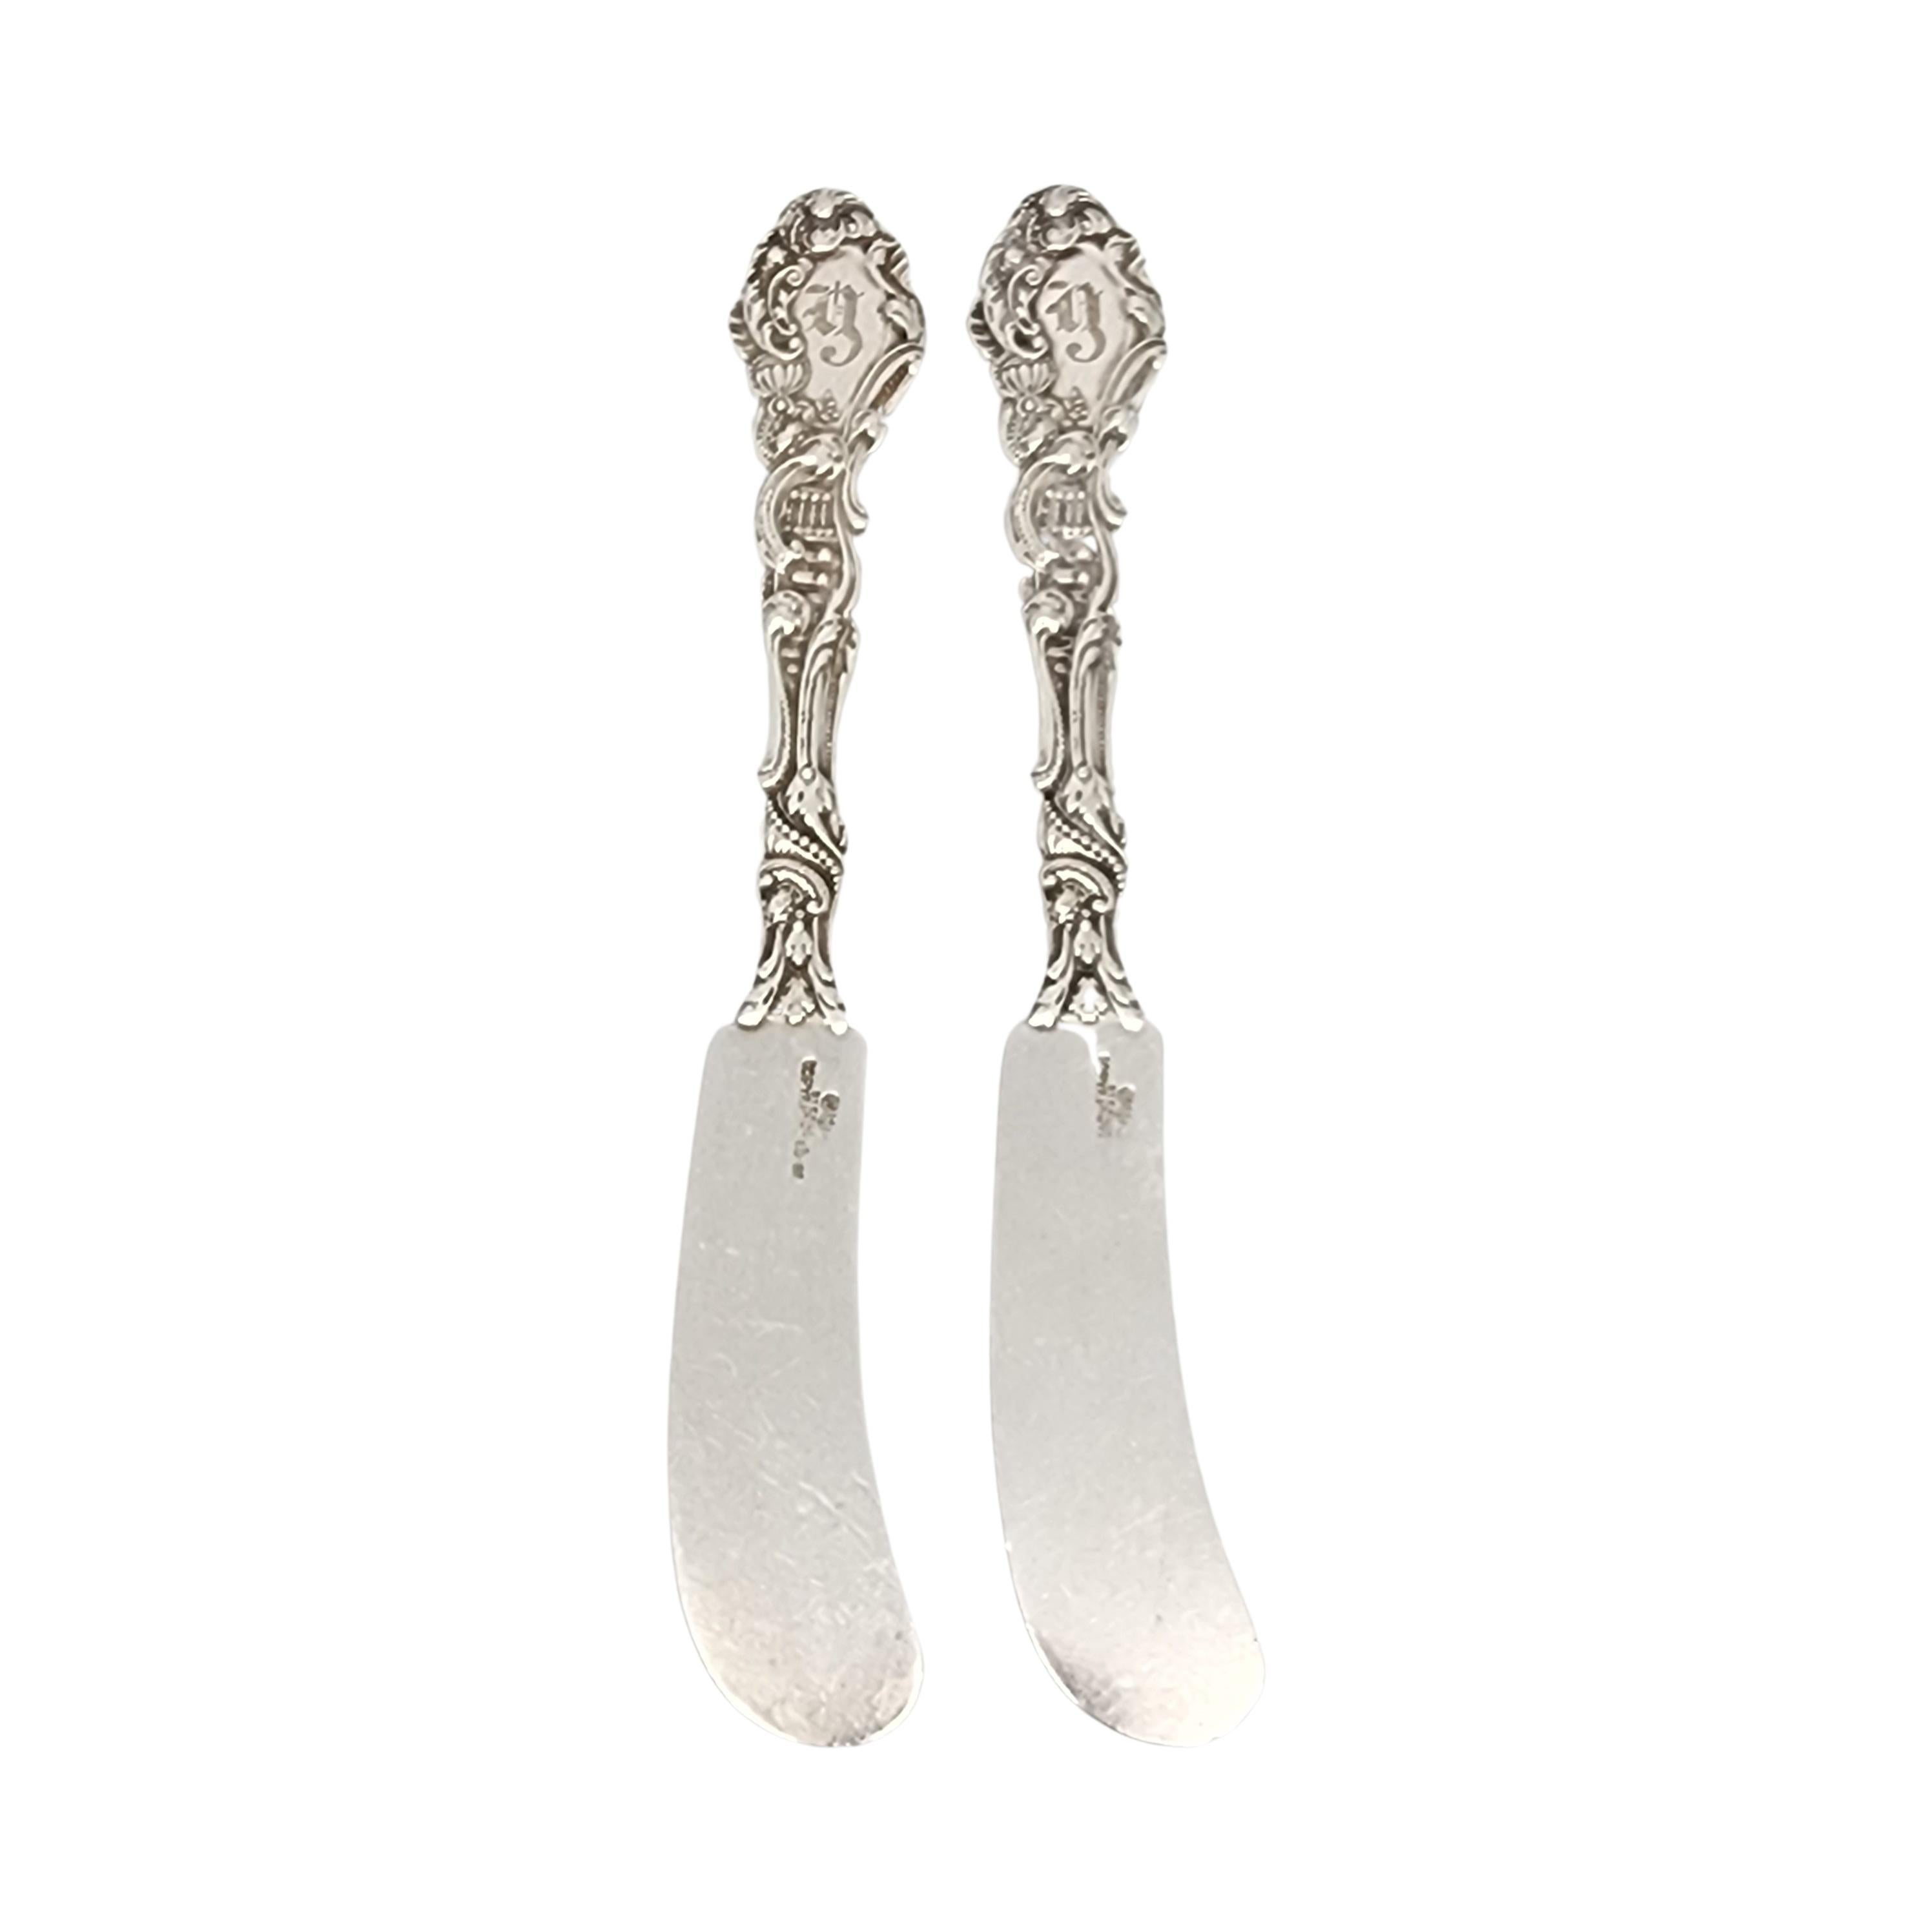 Set of 2 sterling silver large flat handle butter spreaders in the Versailles pattern by Gorham.

Monogram appears to be Y (see photo).

Gorham's Versailles is a multi motif pattern designed by Antoine Heller in 1885. Named for the Palace of